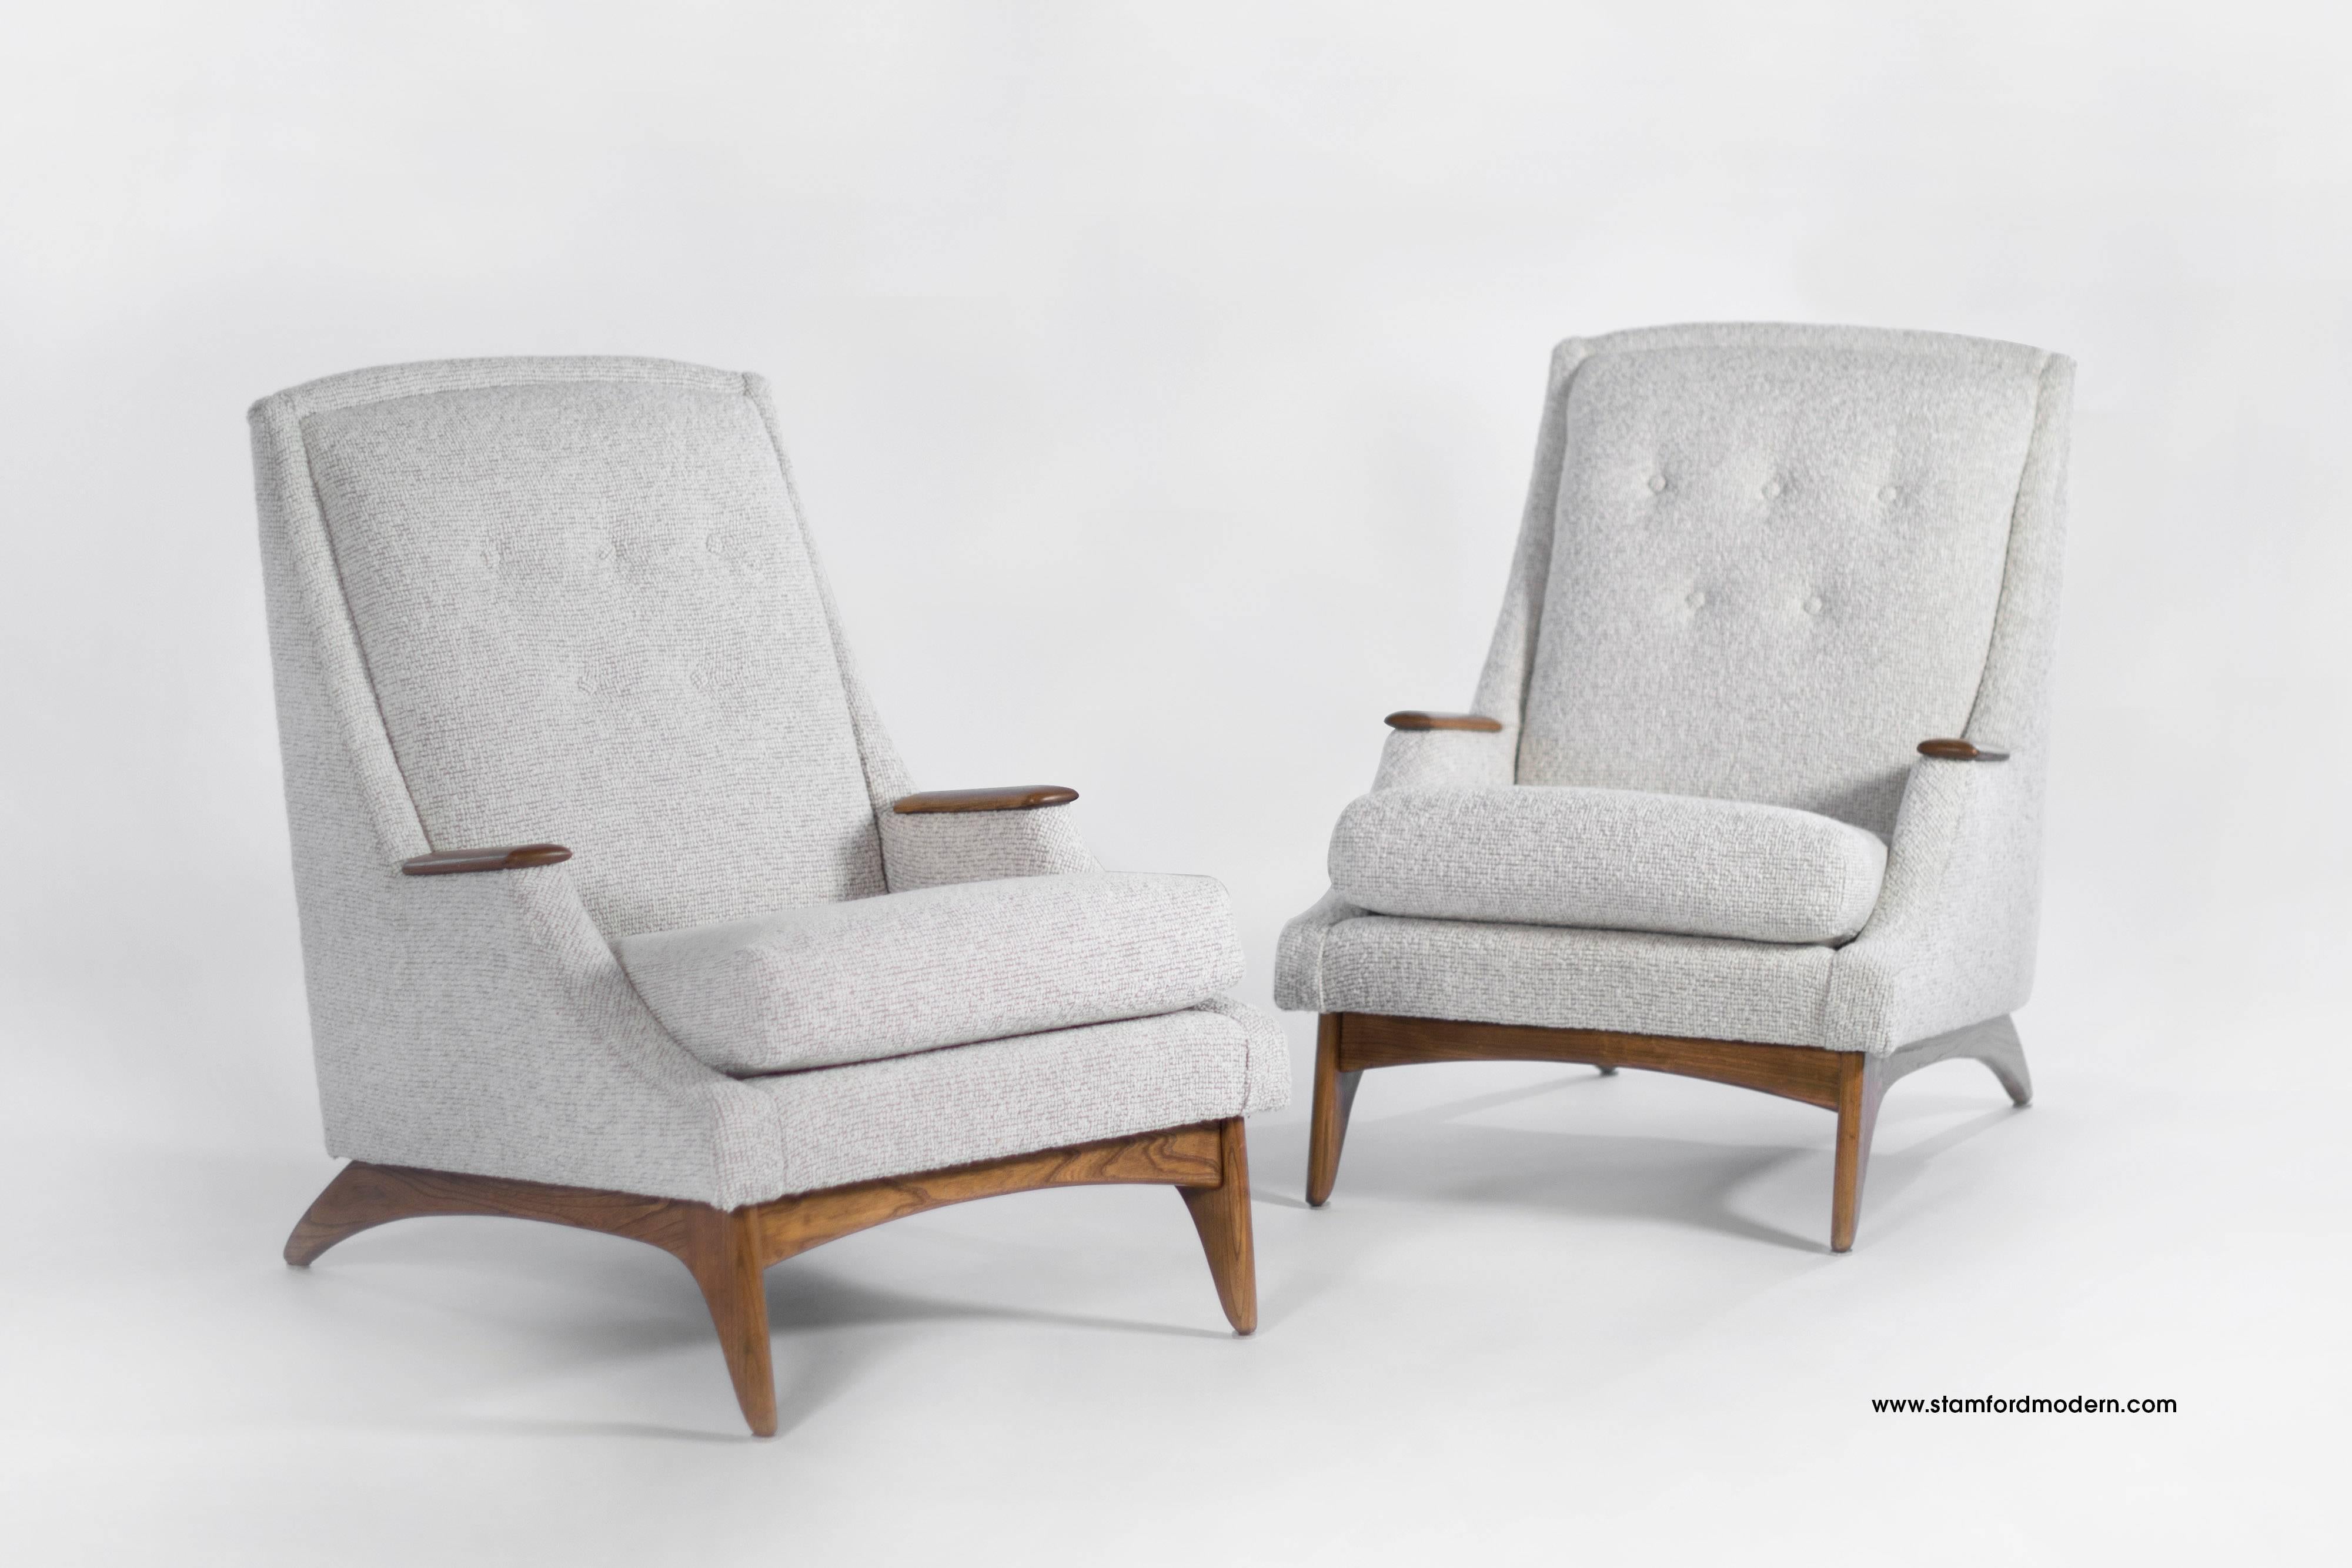 Pair of super comfortable high back lounge chairs with sculptural form designed by Adrian Pearsall, circa 1950s.